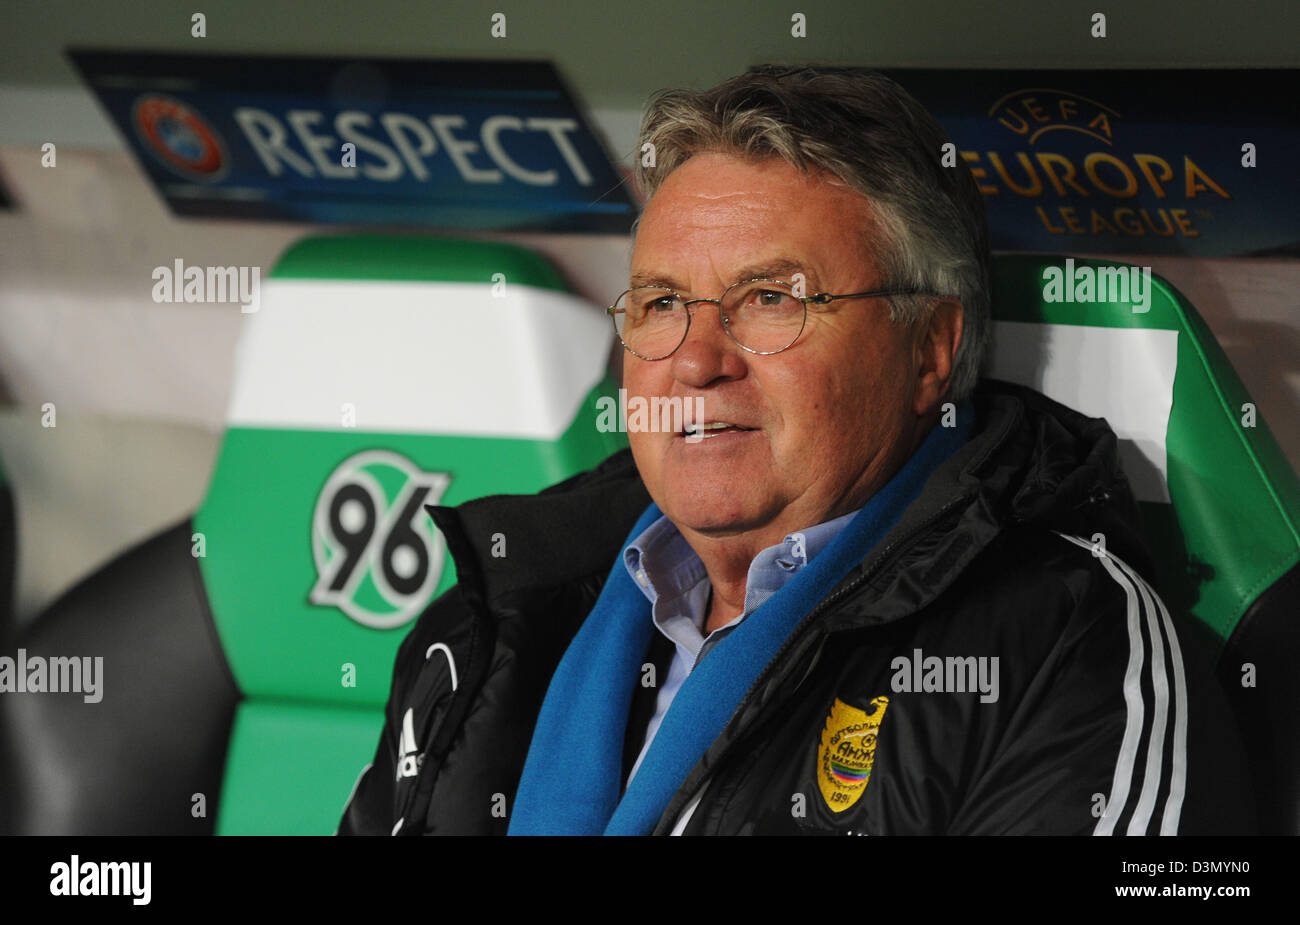 Makhachkala's head coach Guus Hiddink gestures during the UEFA Europa League round of 32 second leg soccer match between Hanover 96 and FC Anzhi Makhachkala at Hannover Arena in Hanover, Germany, 21 February 2013. Photo: Peter Steffen/dpa Stock Photo